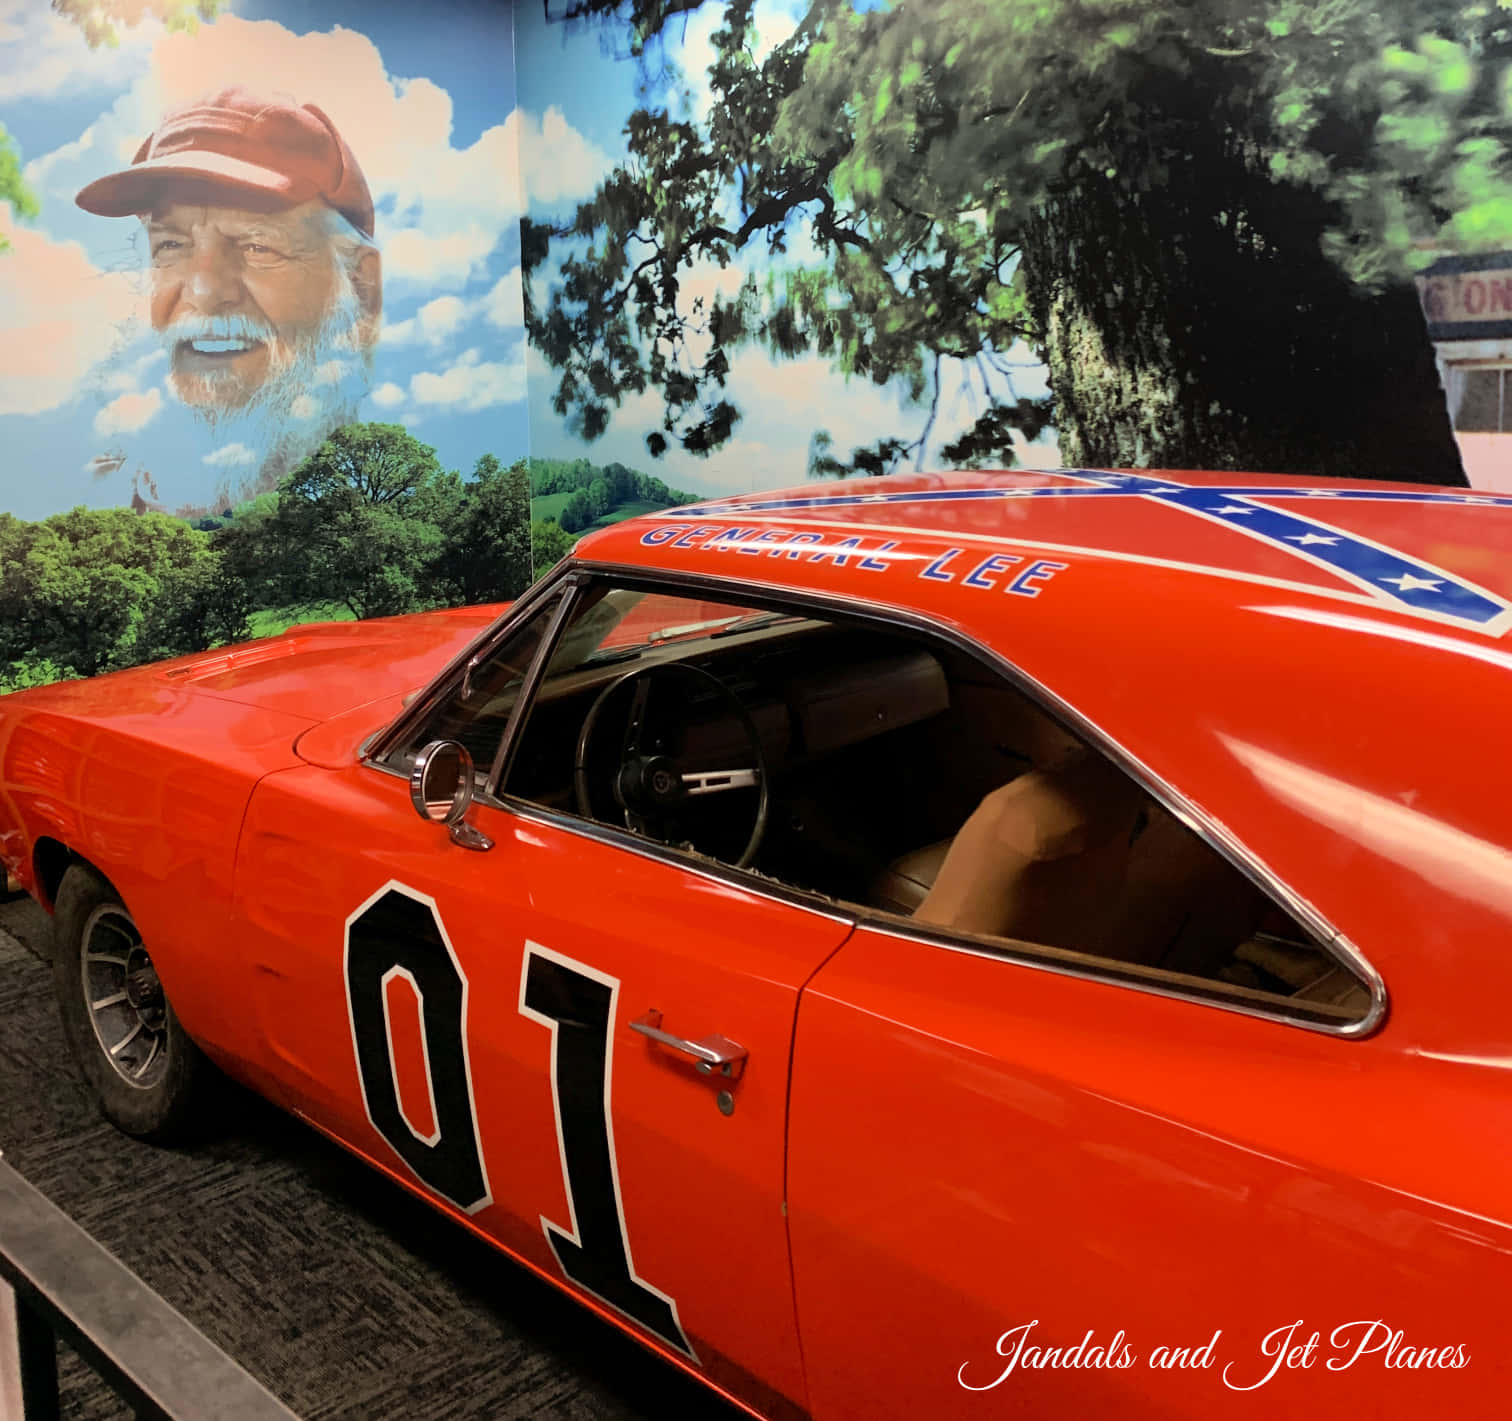 Cruise with style in the legendary General Lee car from the classic TV show "The Dukes of Hazzard". Wallpaper